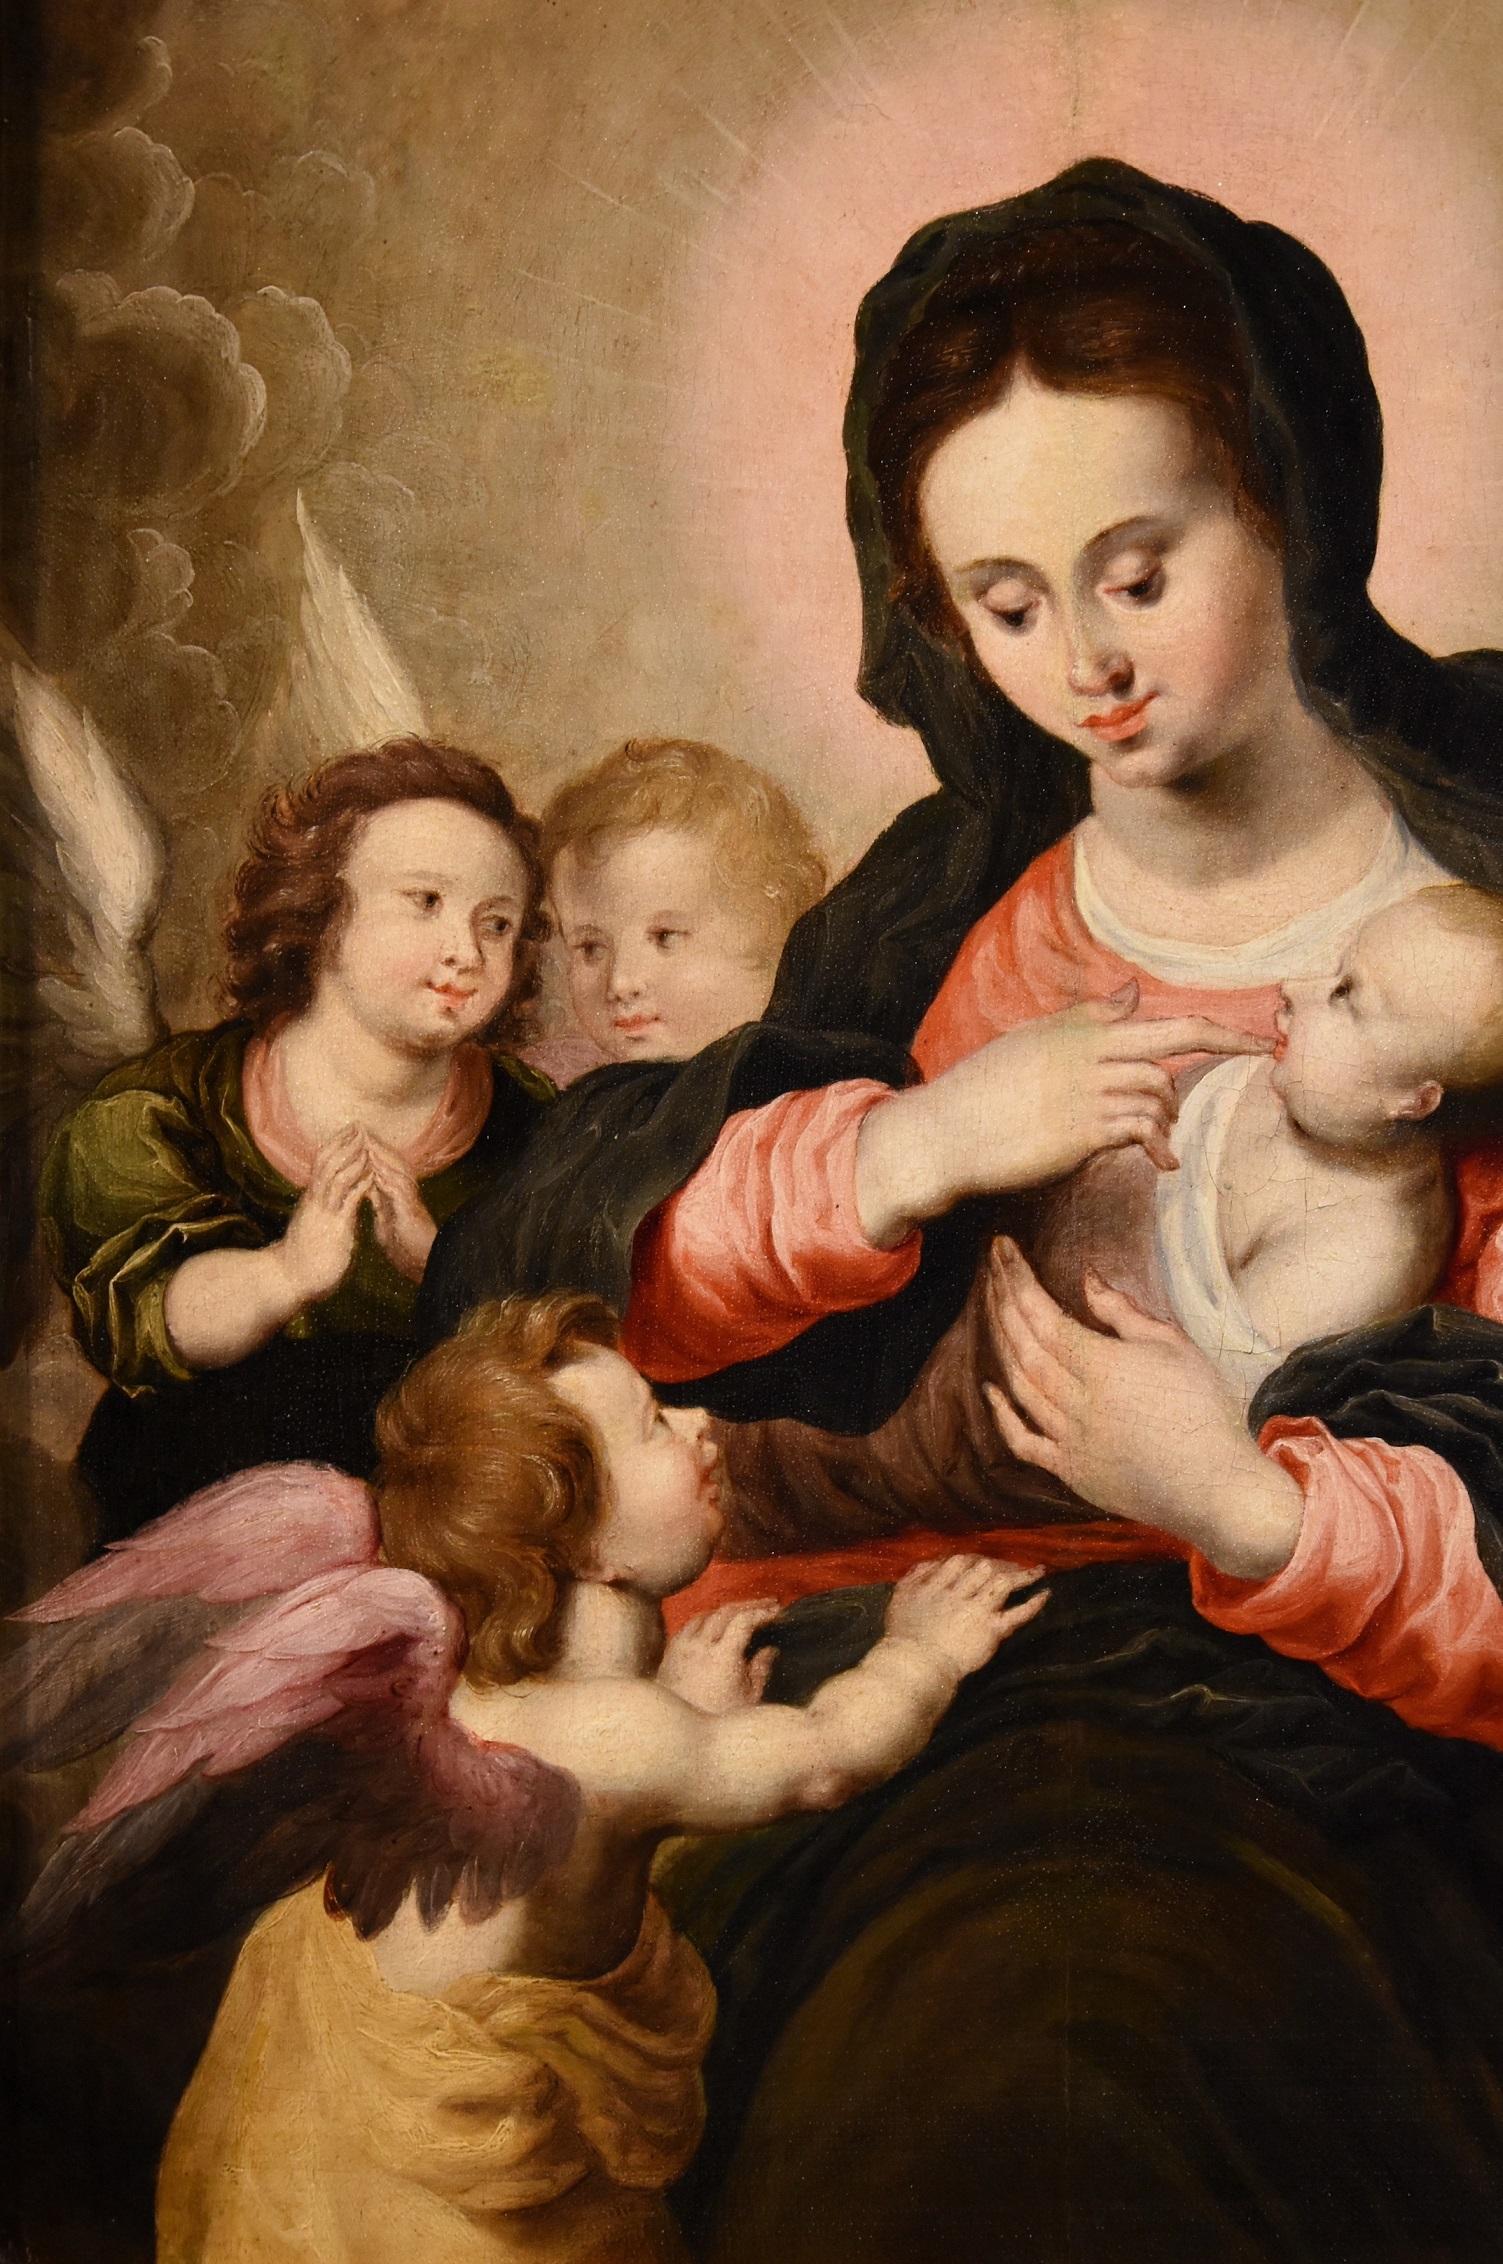 Hendrick van Balen (Antwerp 1575 - 1632) workshop
Possible Jan van Balen (Antwerp 1611 - 1654)

Madonna and Child with Three Angels

Oil on panel
65 x 50 cm. - in frame 94 x 80 cm.

All the details relating to this painting can be viewed at the